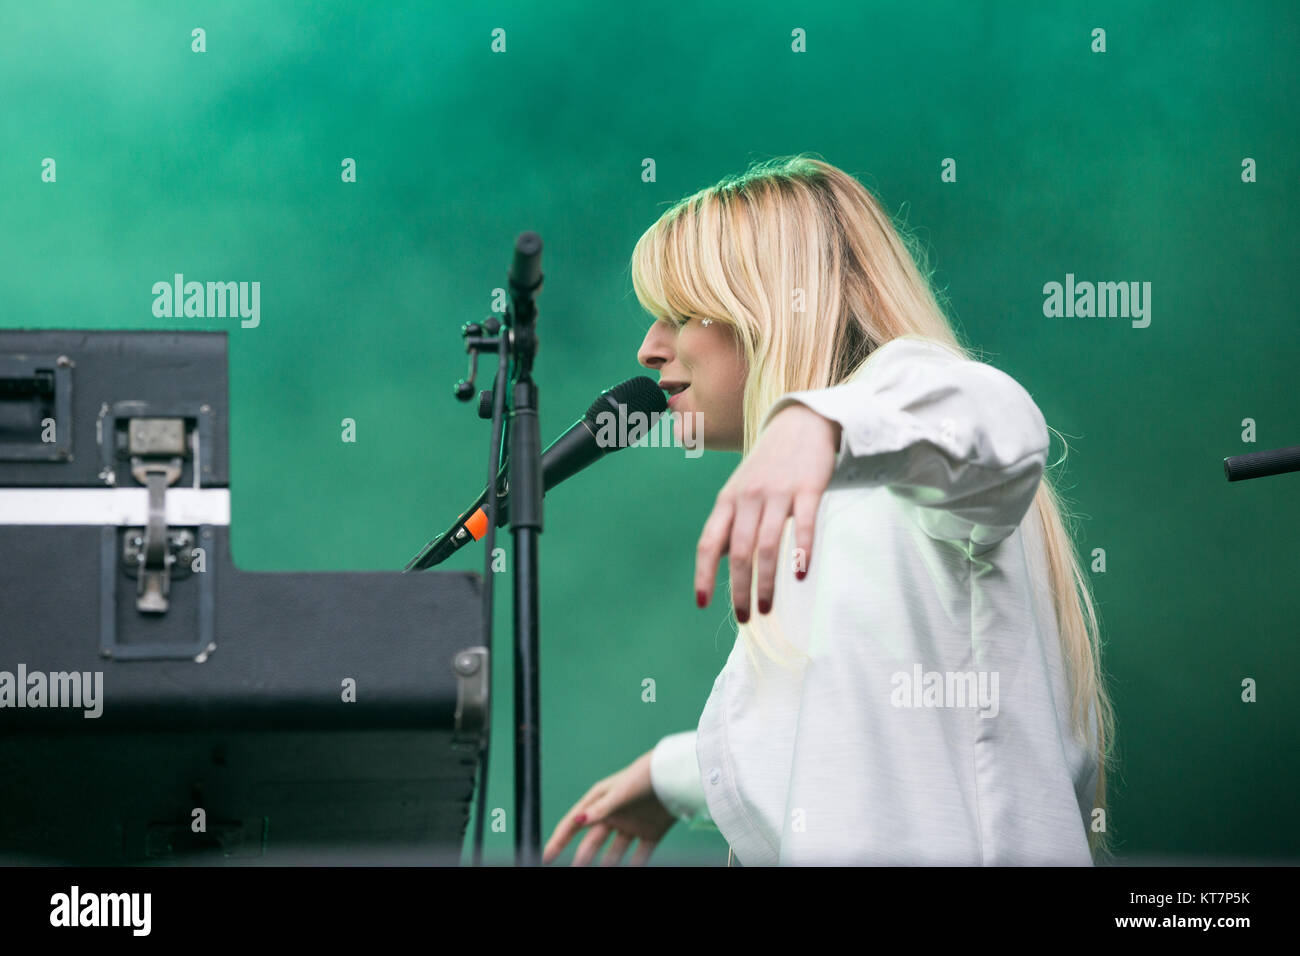 The Norwegian singer-songwriter and musician Susanne Sundfør performs a live concert at the Norwegian music Norwegian wood in Oslo. Norway, 15/06 2017. Stock Photo